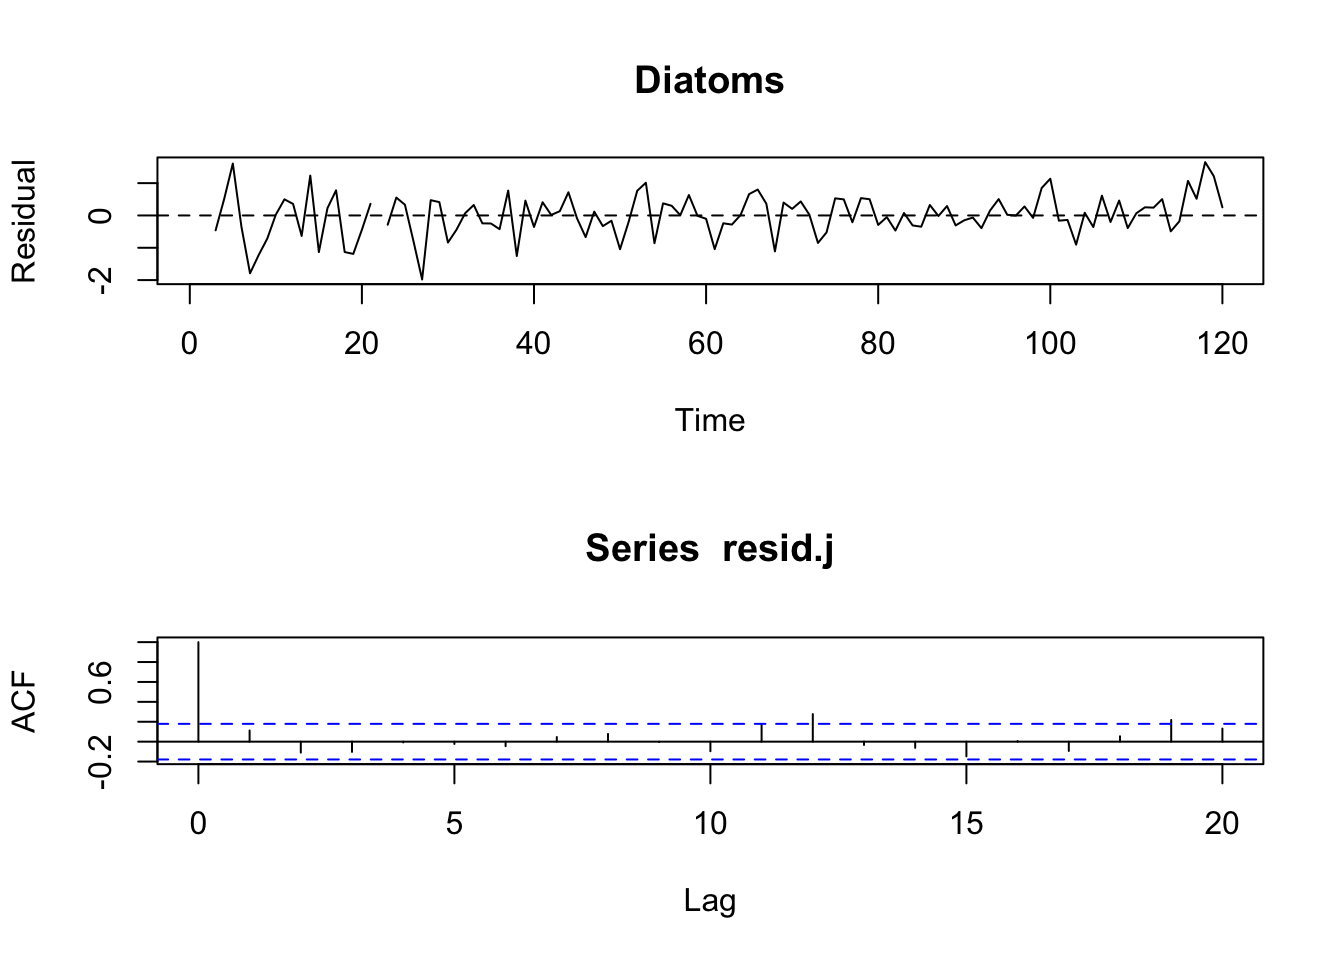 Residuals for model with season modelled as a discrete Fourier series.